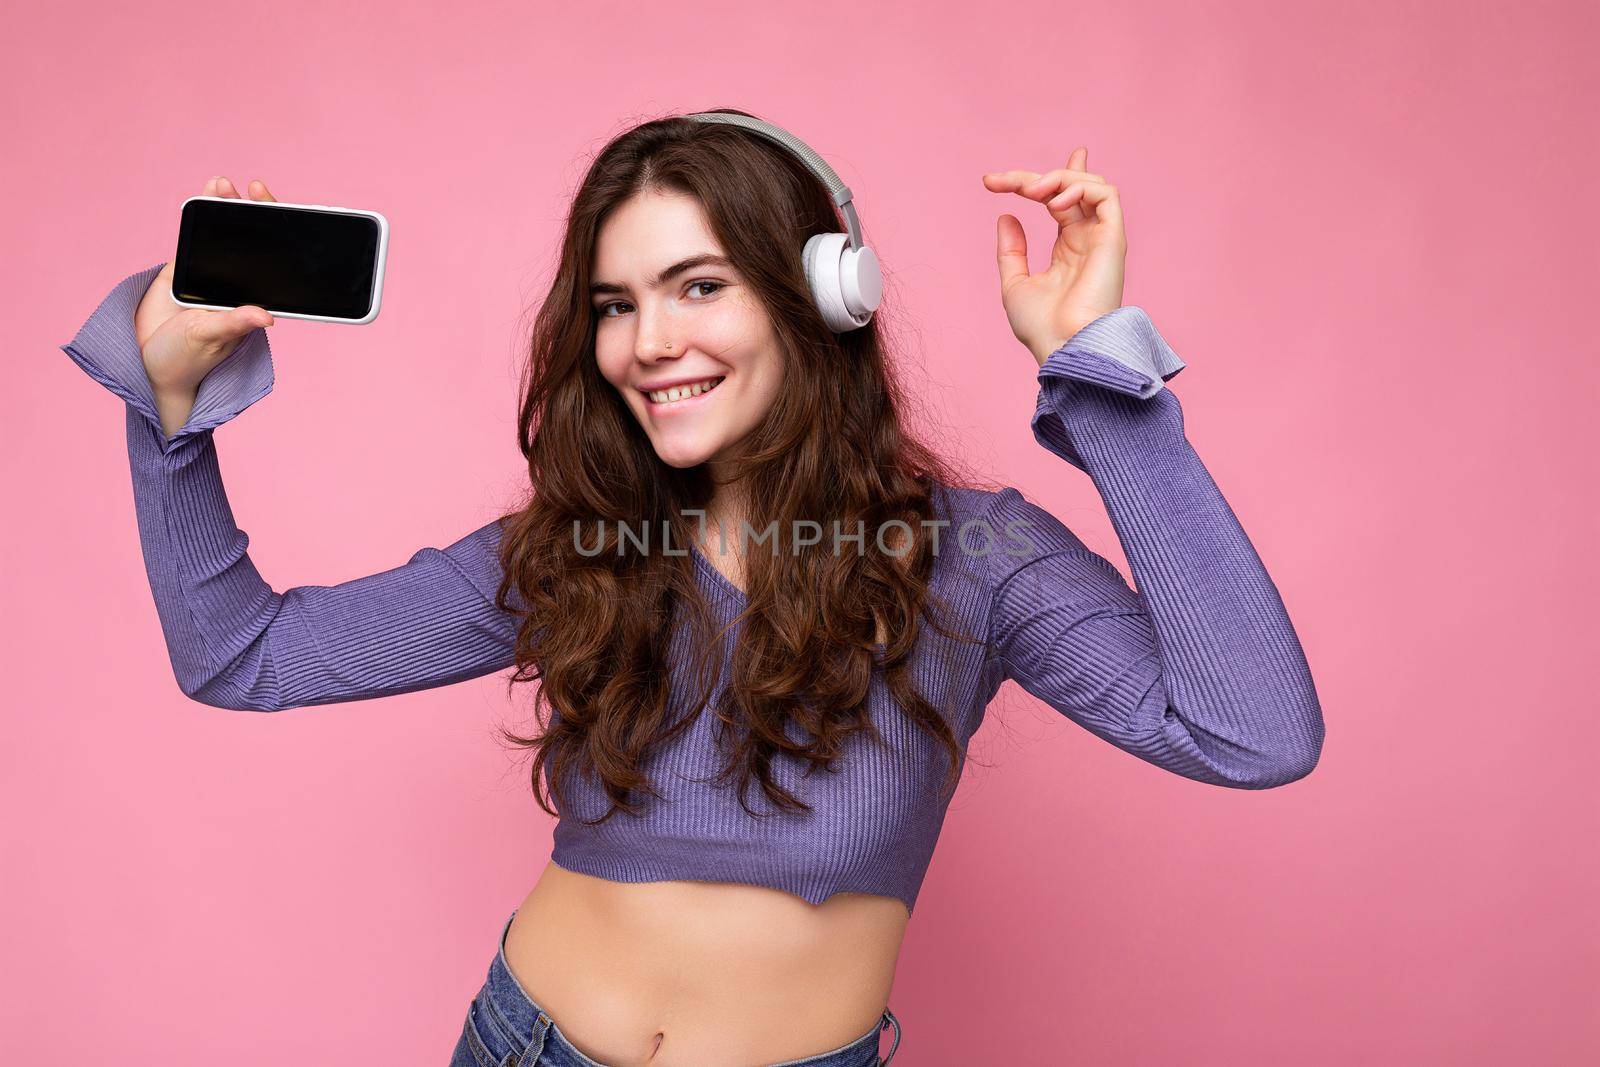 Beautiful happy smiling young woman wearing stylish casual outfit isolated on background wall holding and showing mobile phone with empty display for mockup wearing white bluetooth headphones listening to music and having fun looking at camera by TRMK